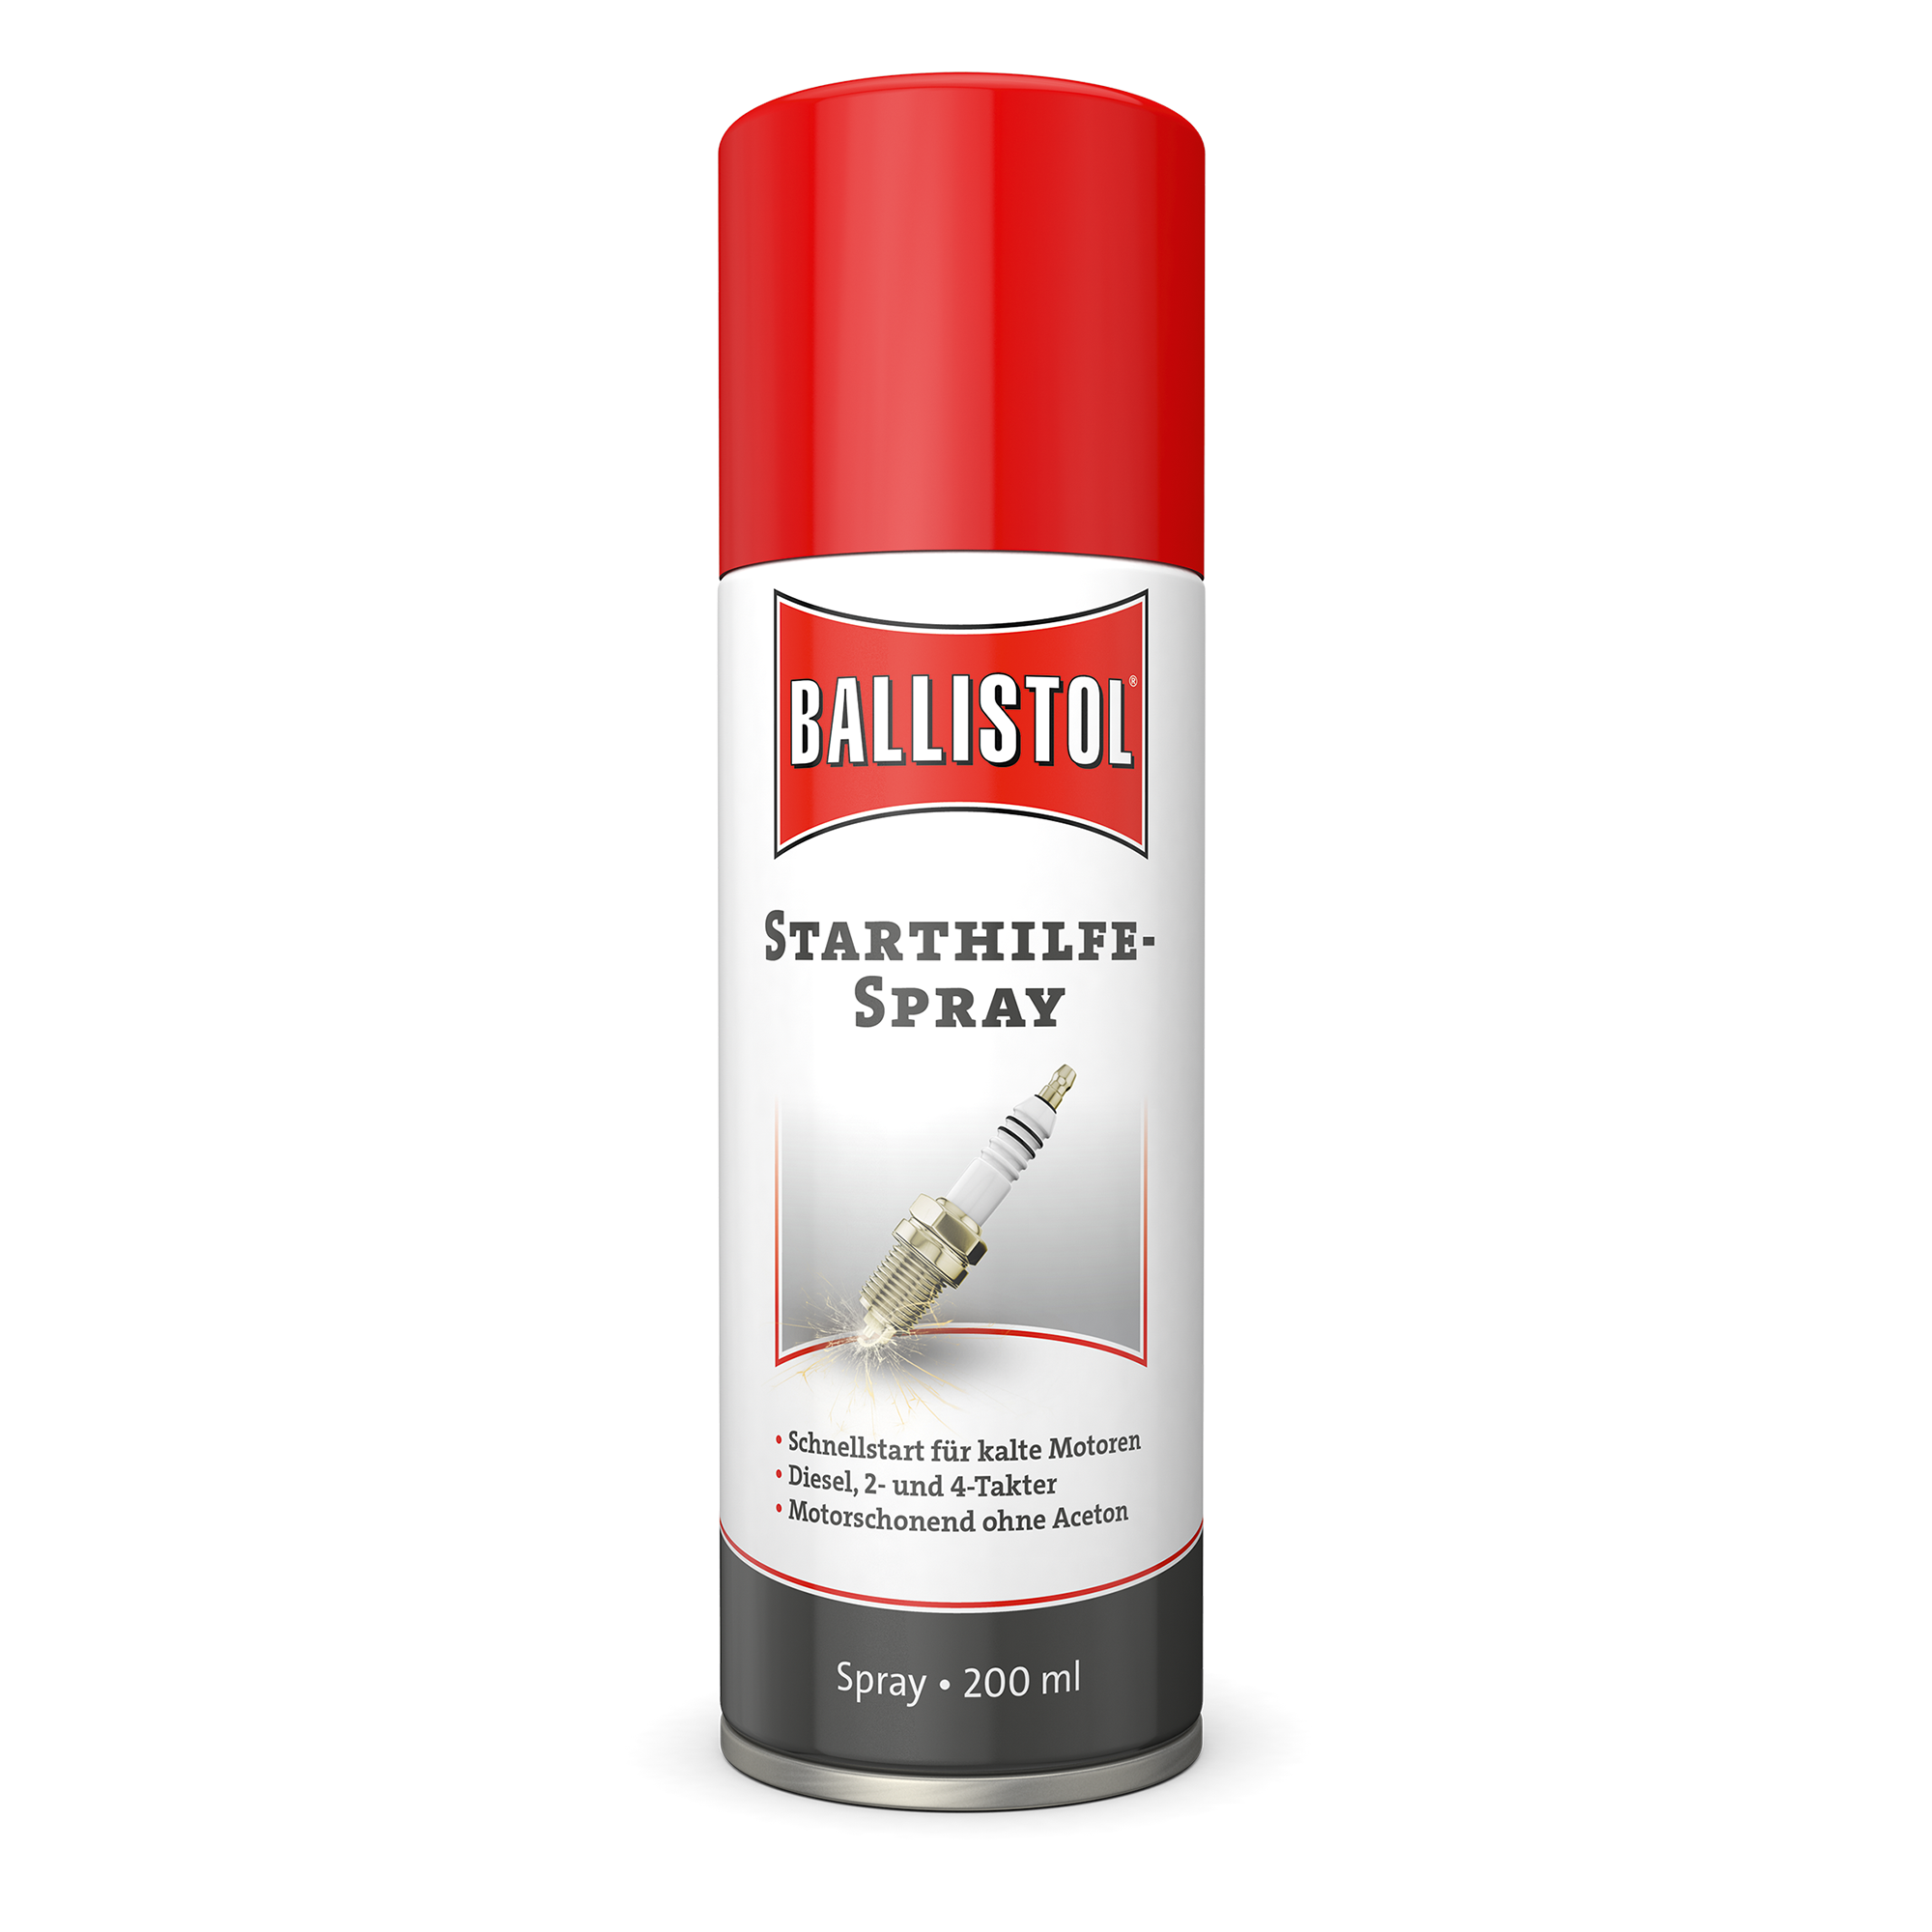 Starthilfe-Spray 200 ml + product picture